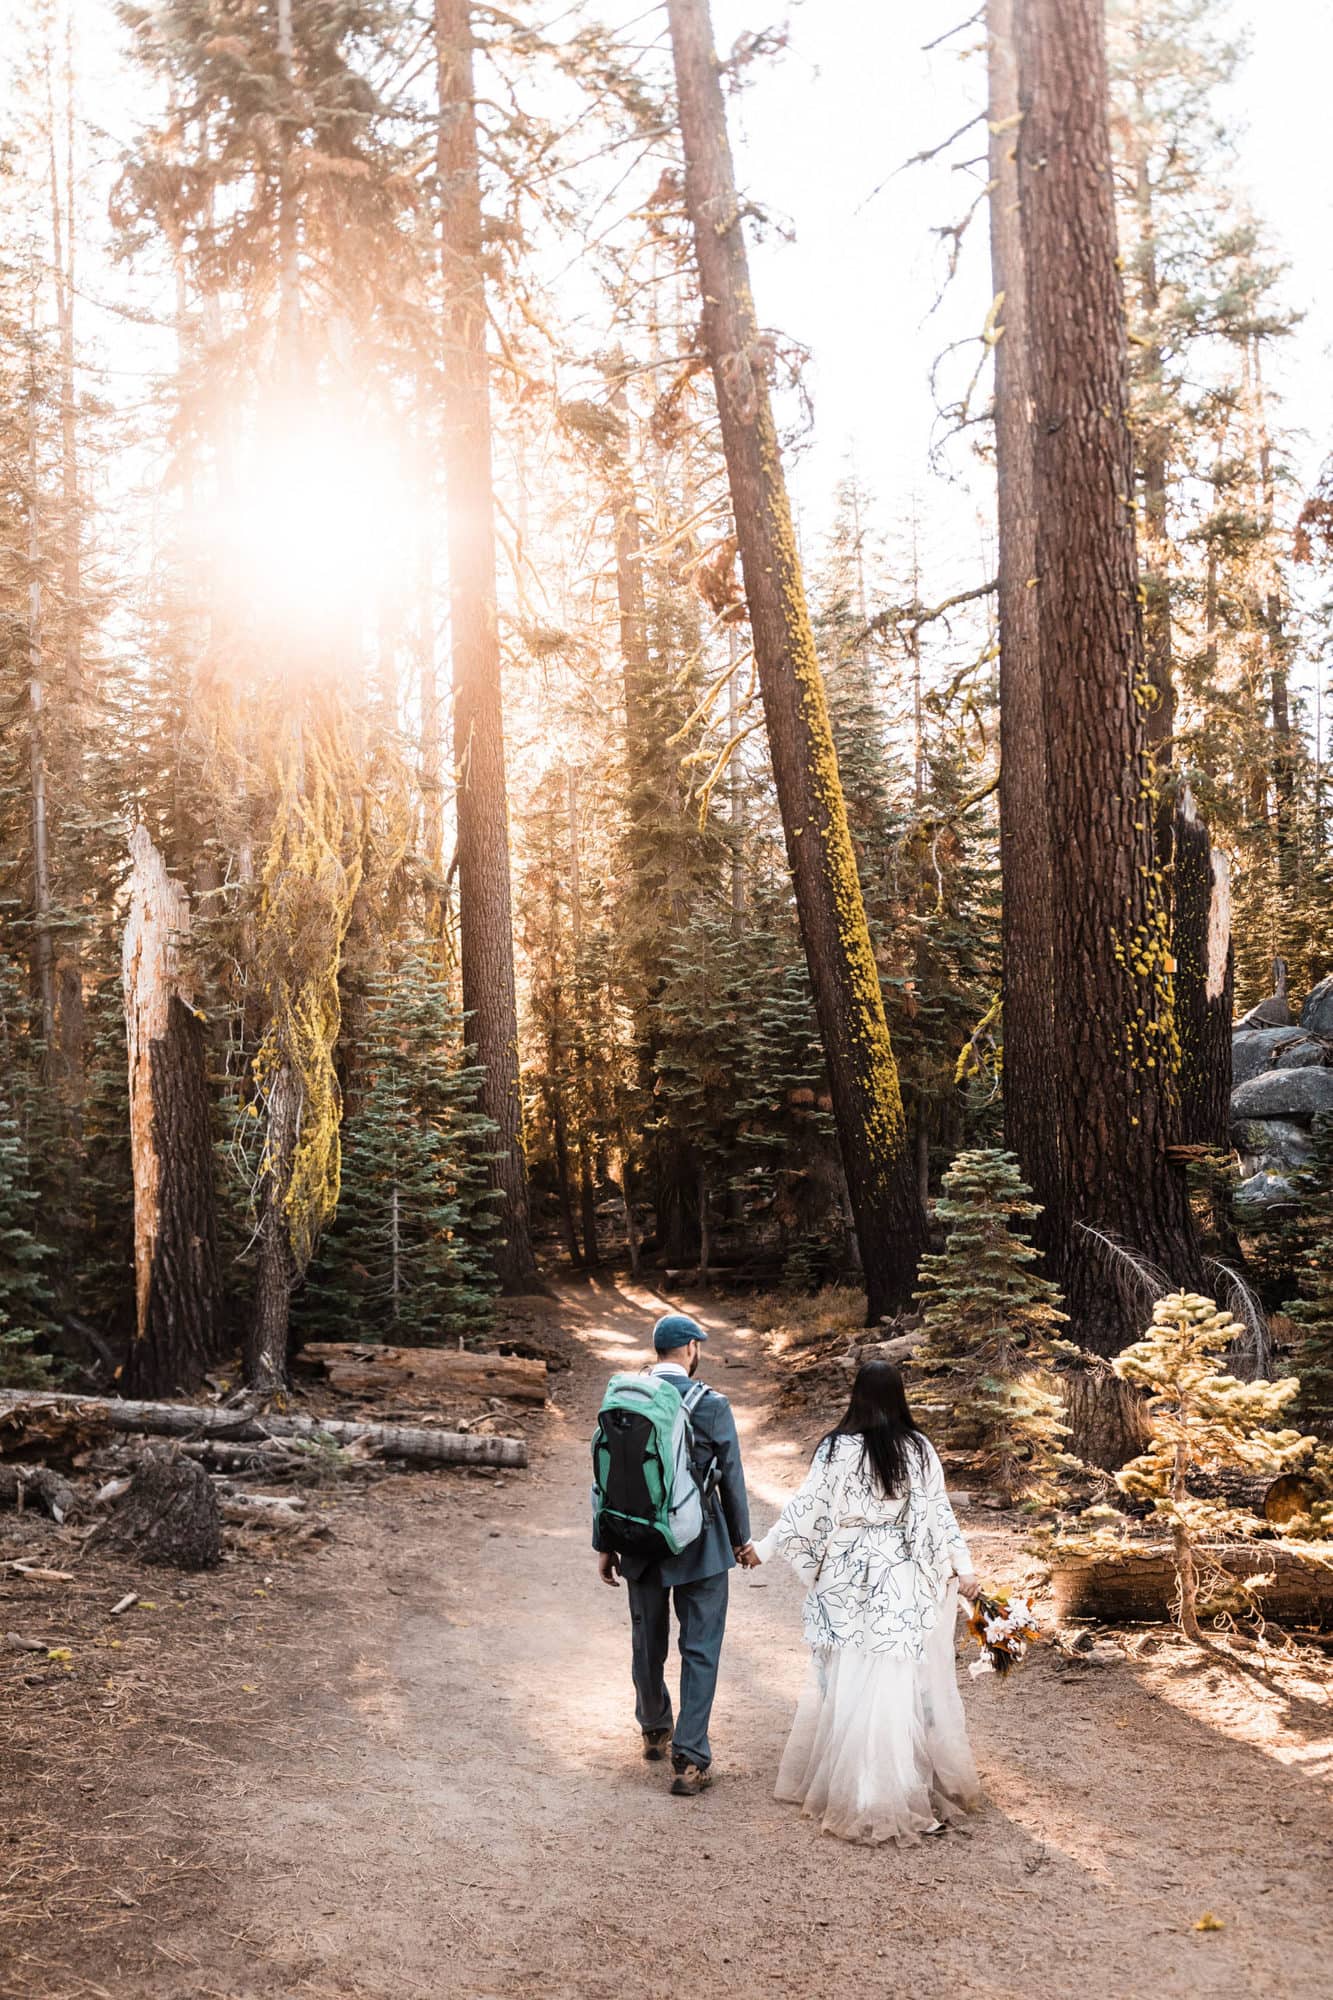 There are tons of reasons eloping is the best! Whether you’re certain you're eloping or you're not sure yet, here's some info on the top 9 reasons to elope.